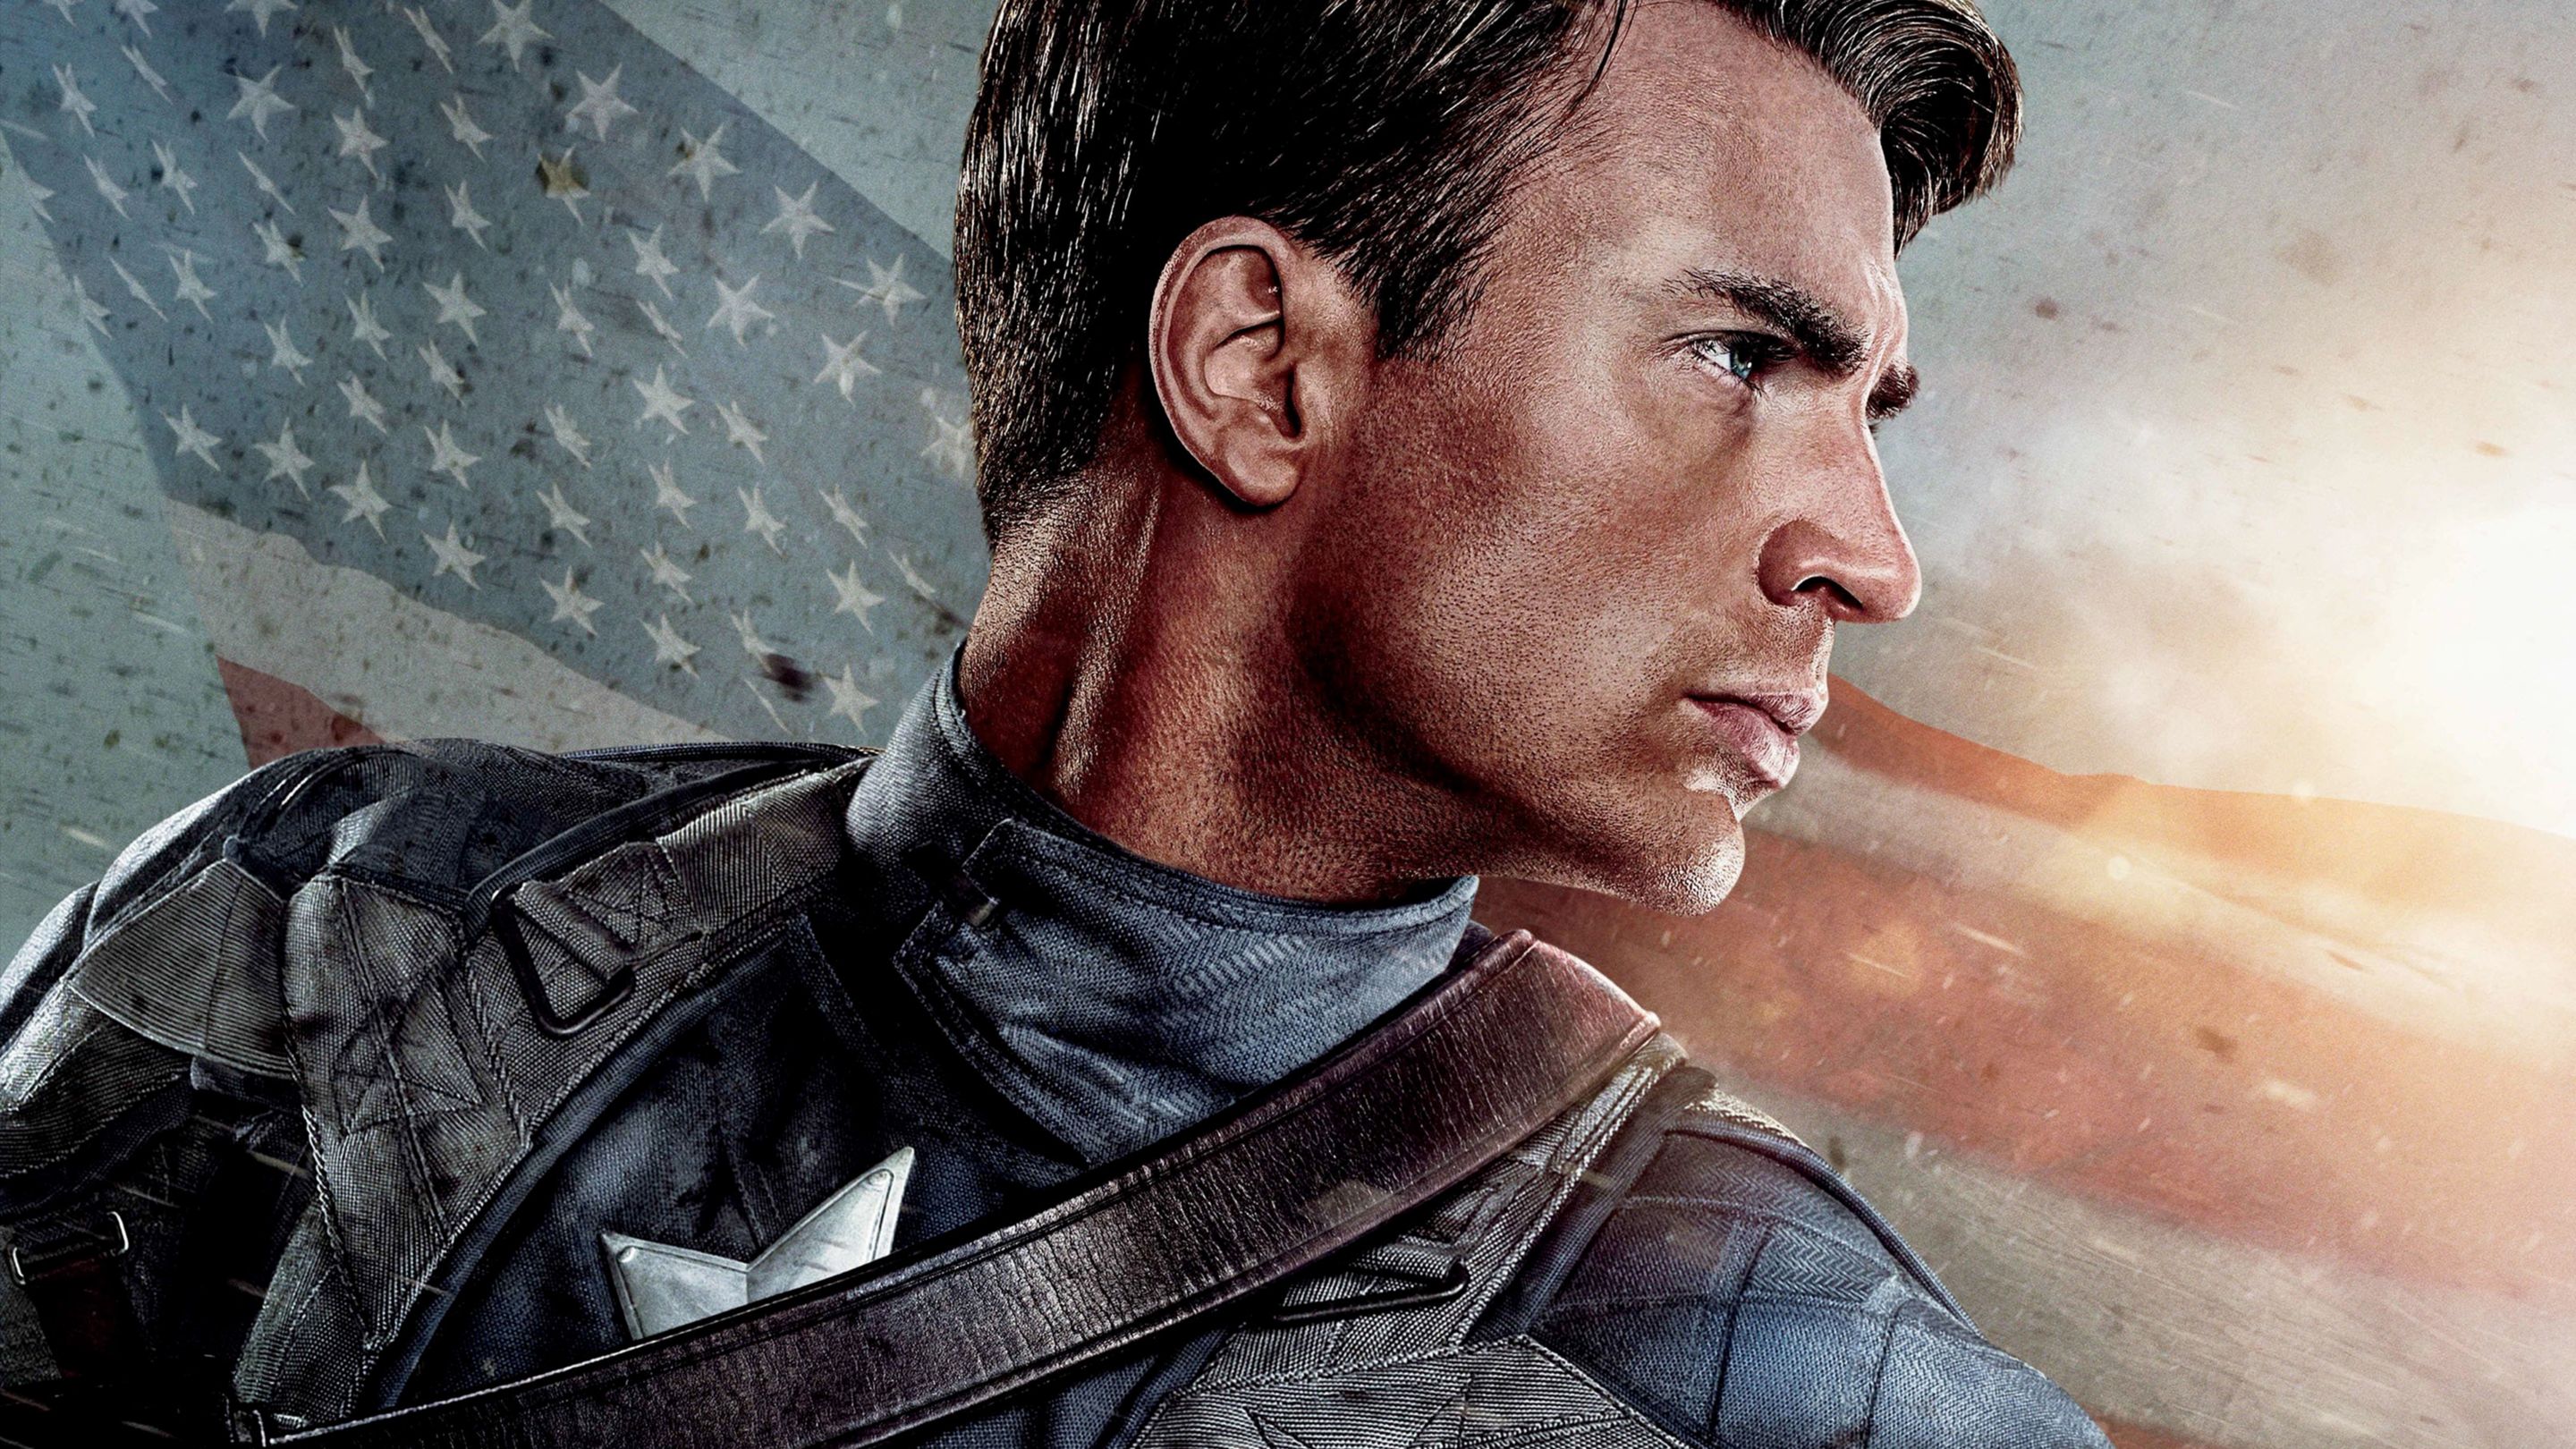 Watch Captain America: The First Avenger